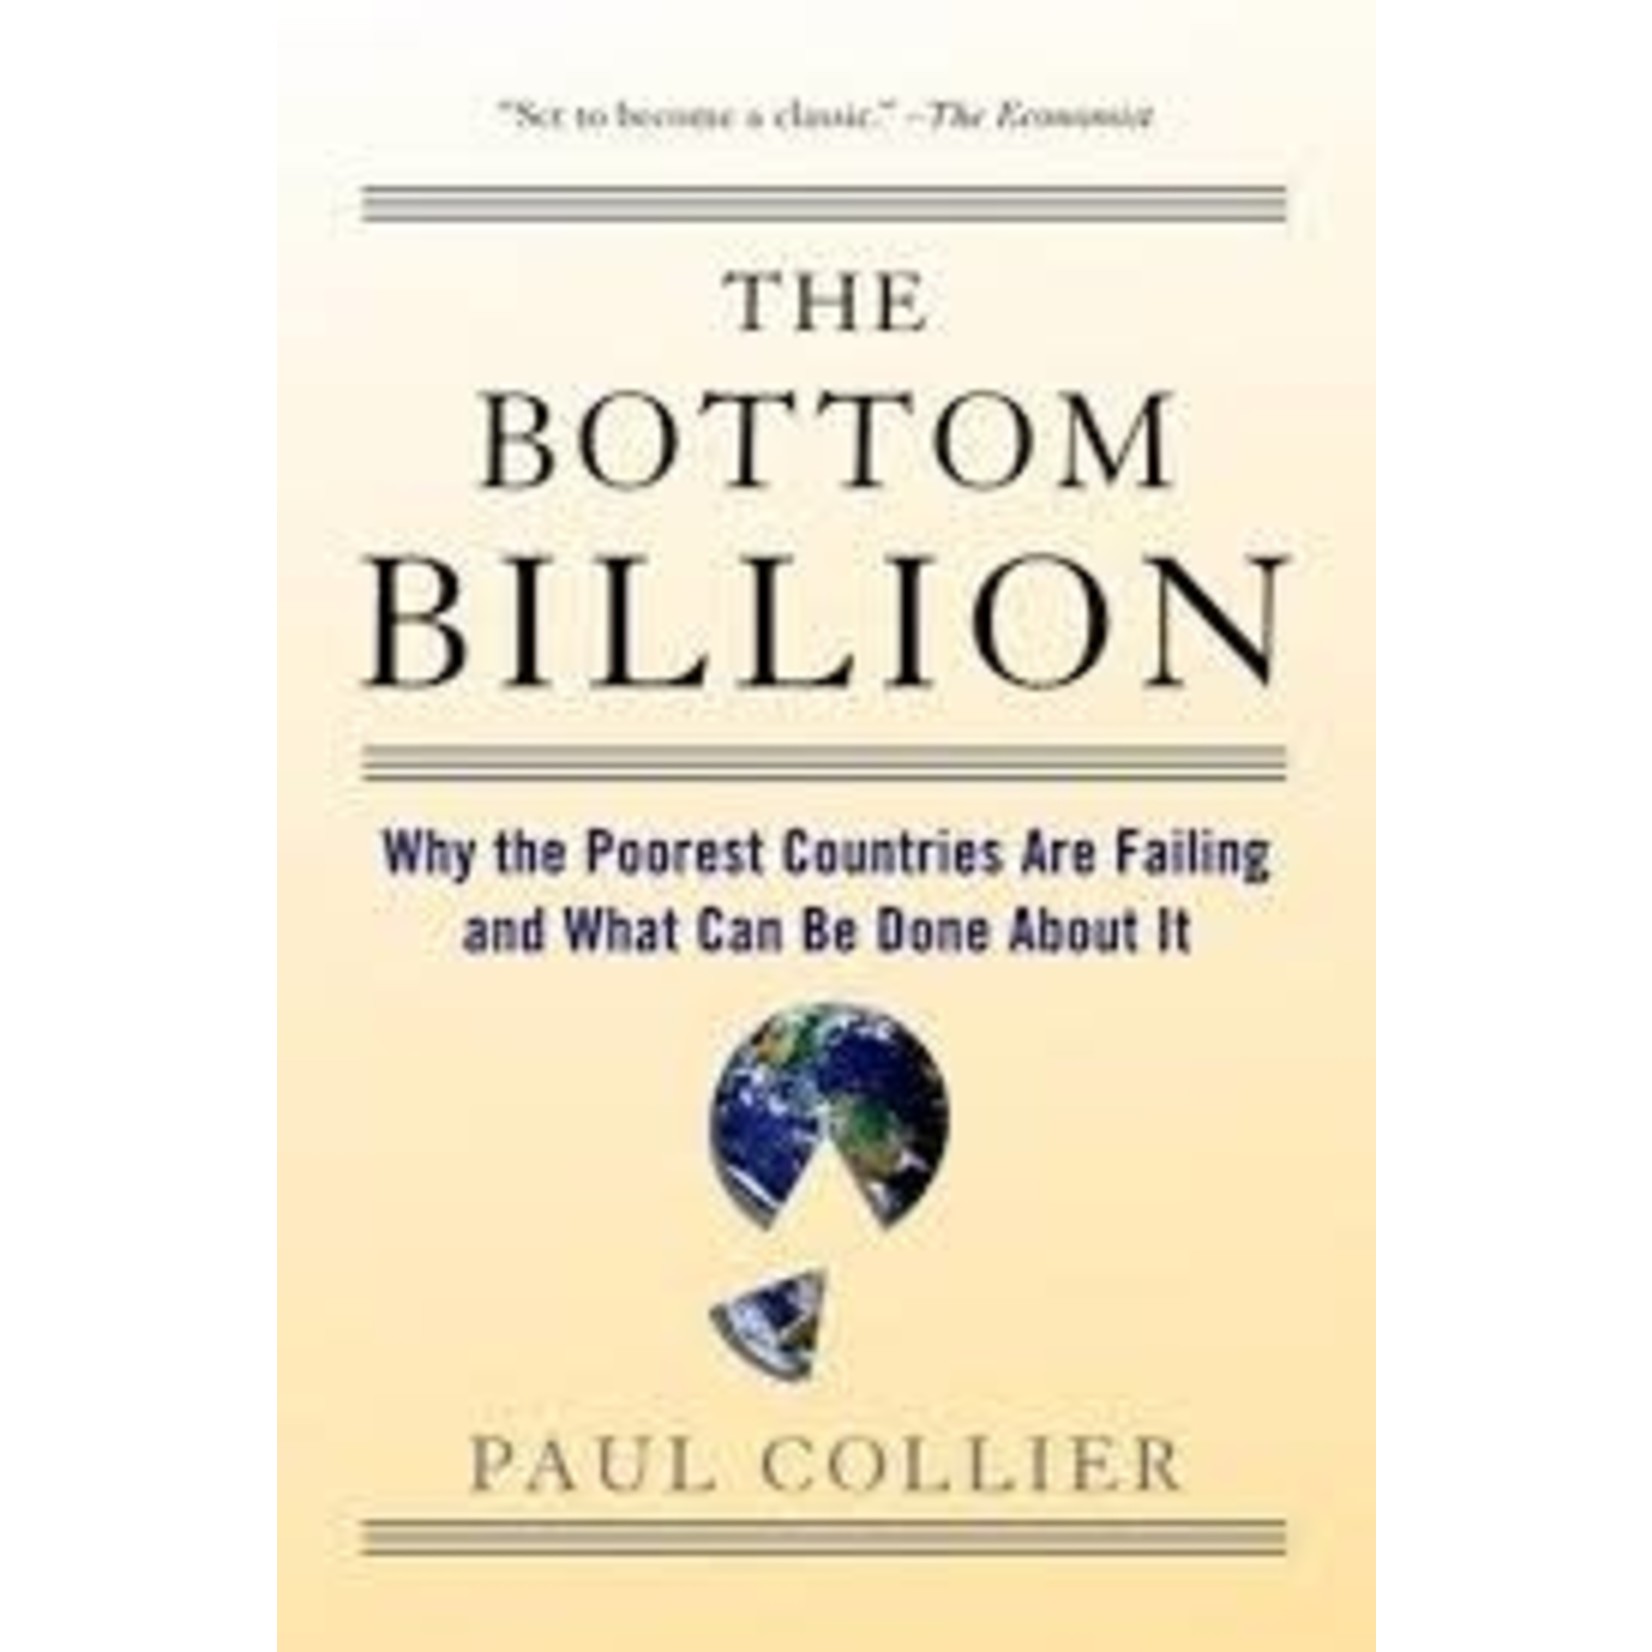 The Bottom Billion: Why the Poorest